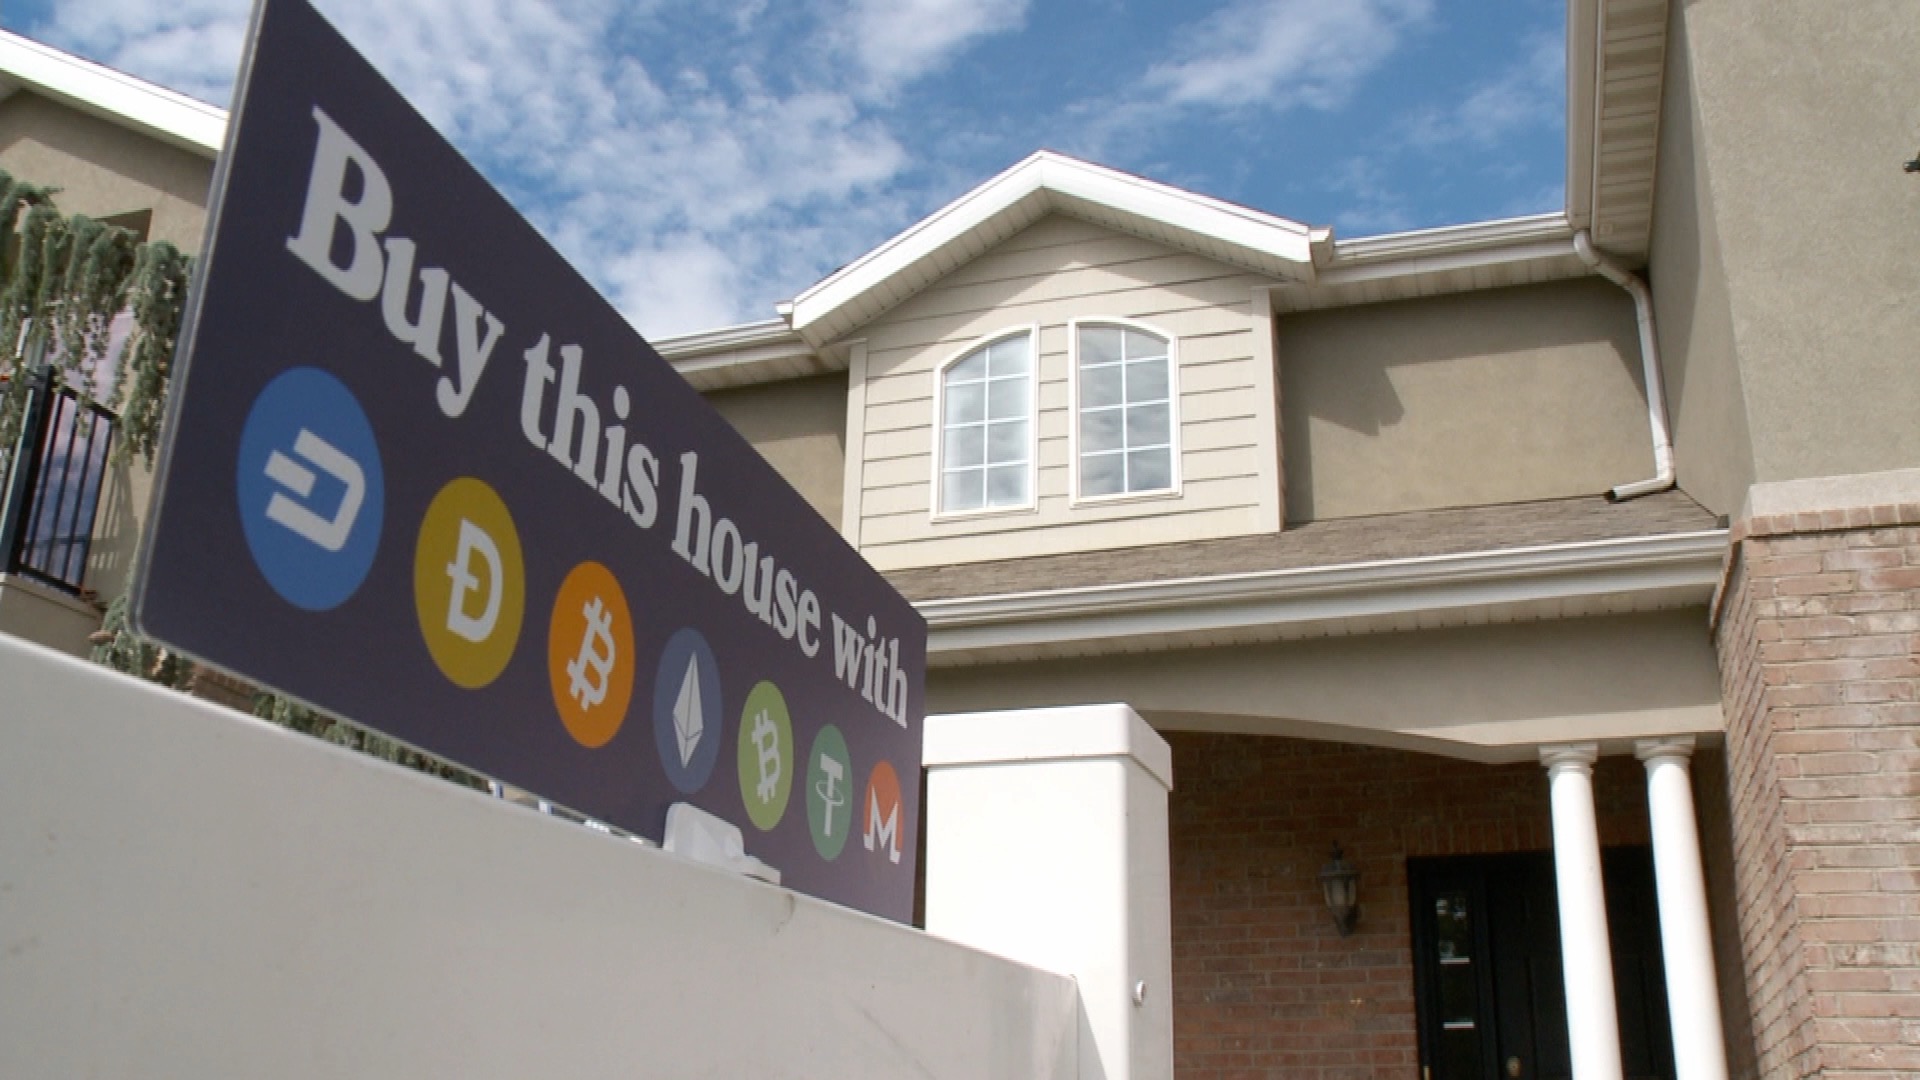 Scott Paul tried to sell his house in Dogecoin. It didn't work, but it proved that Dogecoin houses like these could be more common as the interest in crypto investments surges.